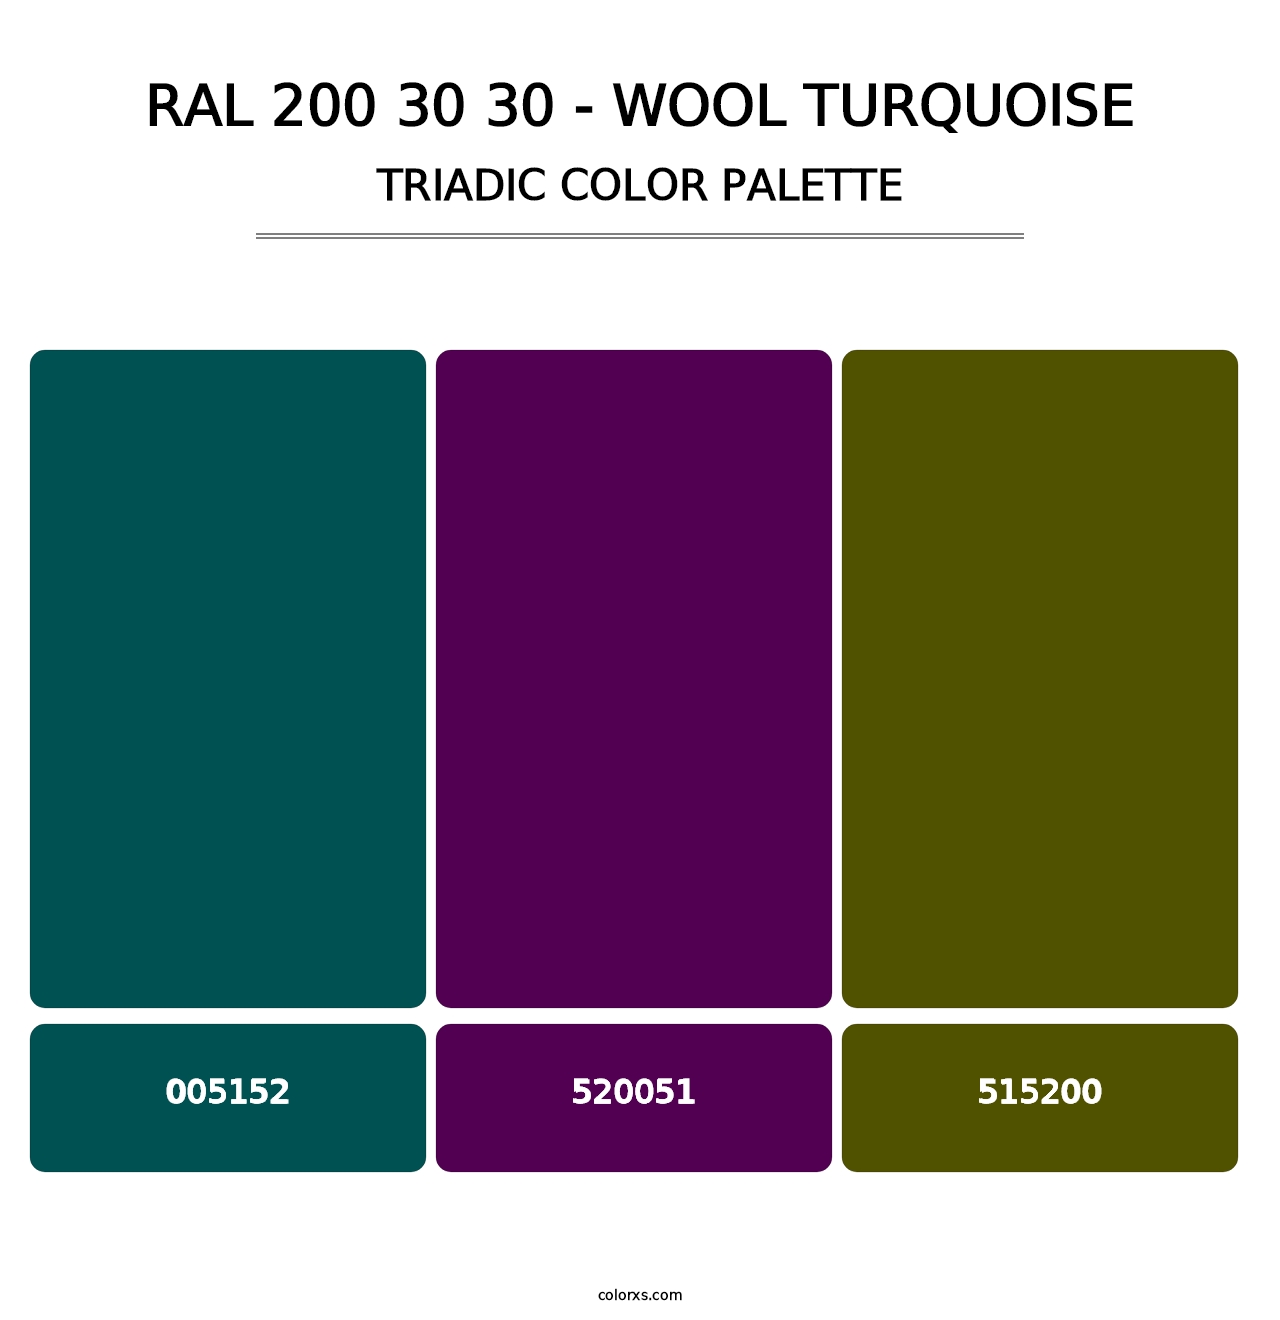 RAL 200 30 30 - Wool Turquoise - Triadic Color Palette